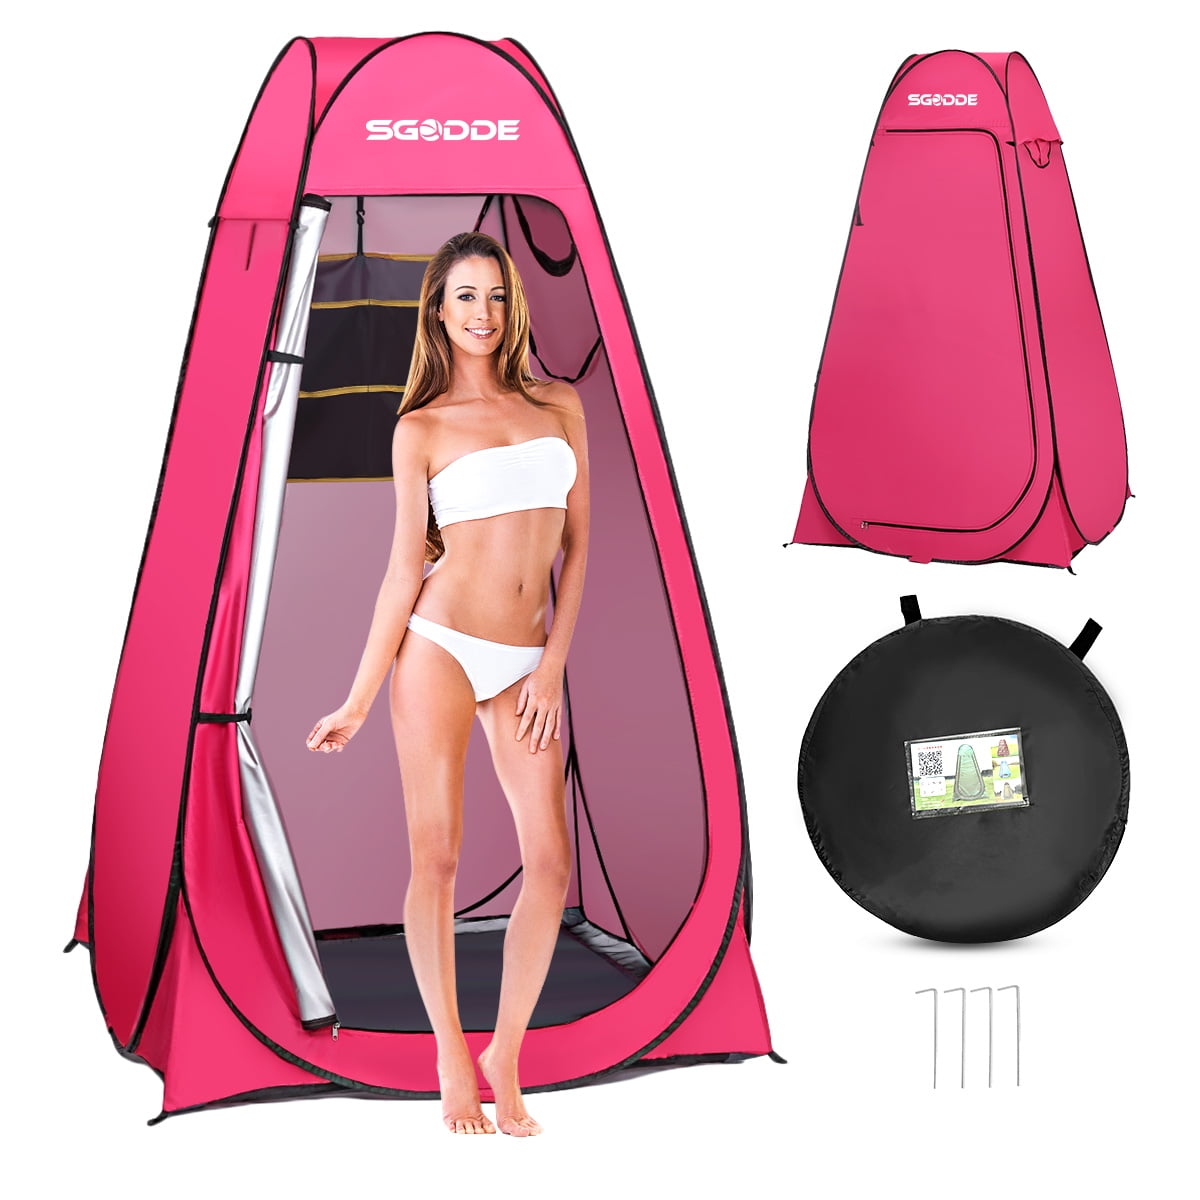 Changing Room SGODD Pop Up Privacy Shower Tent,Instant Portable Outdoor Shower Tent Camp Toilet Rain Shelter with Carry Bag for Camping Hiking Beach Toilet Shower Bathroom 